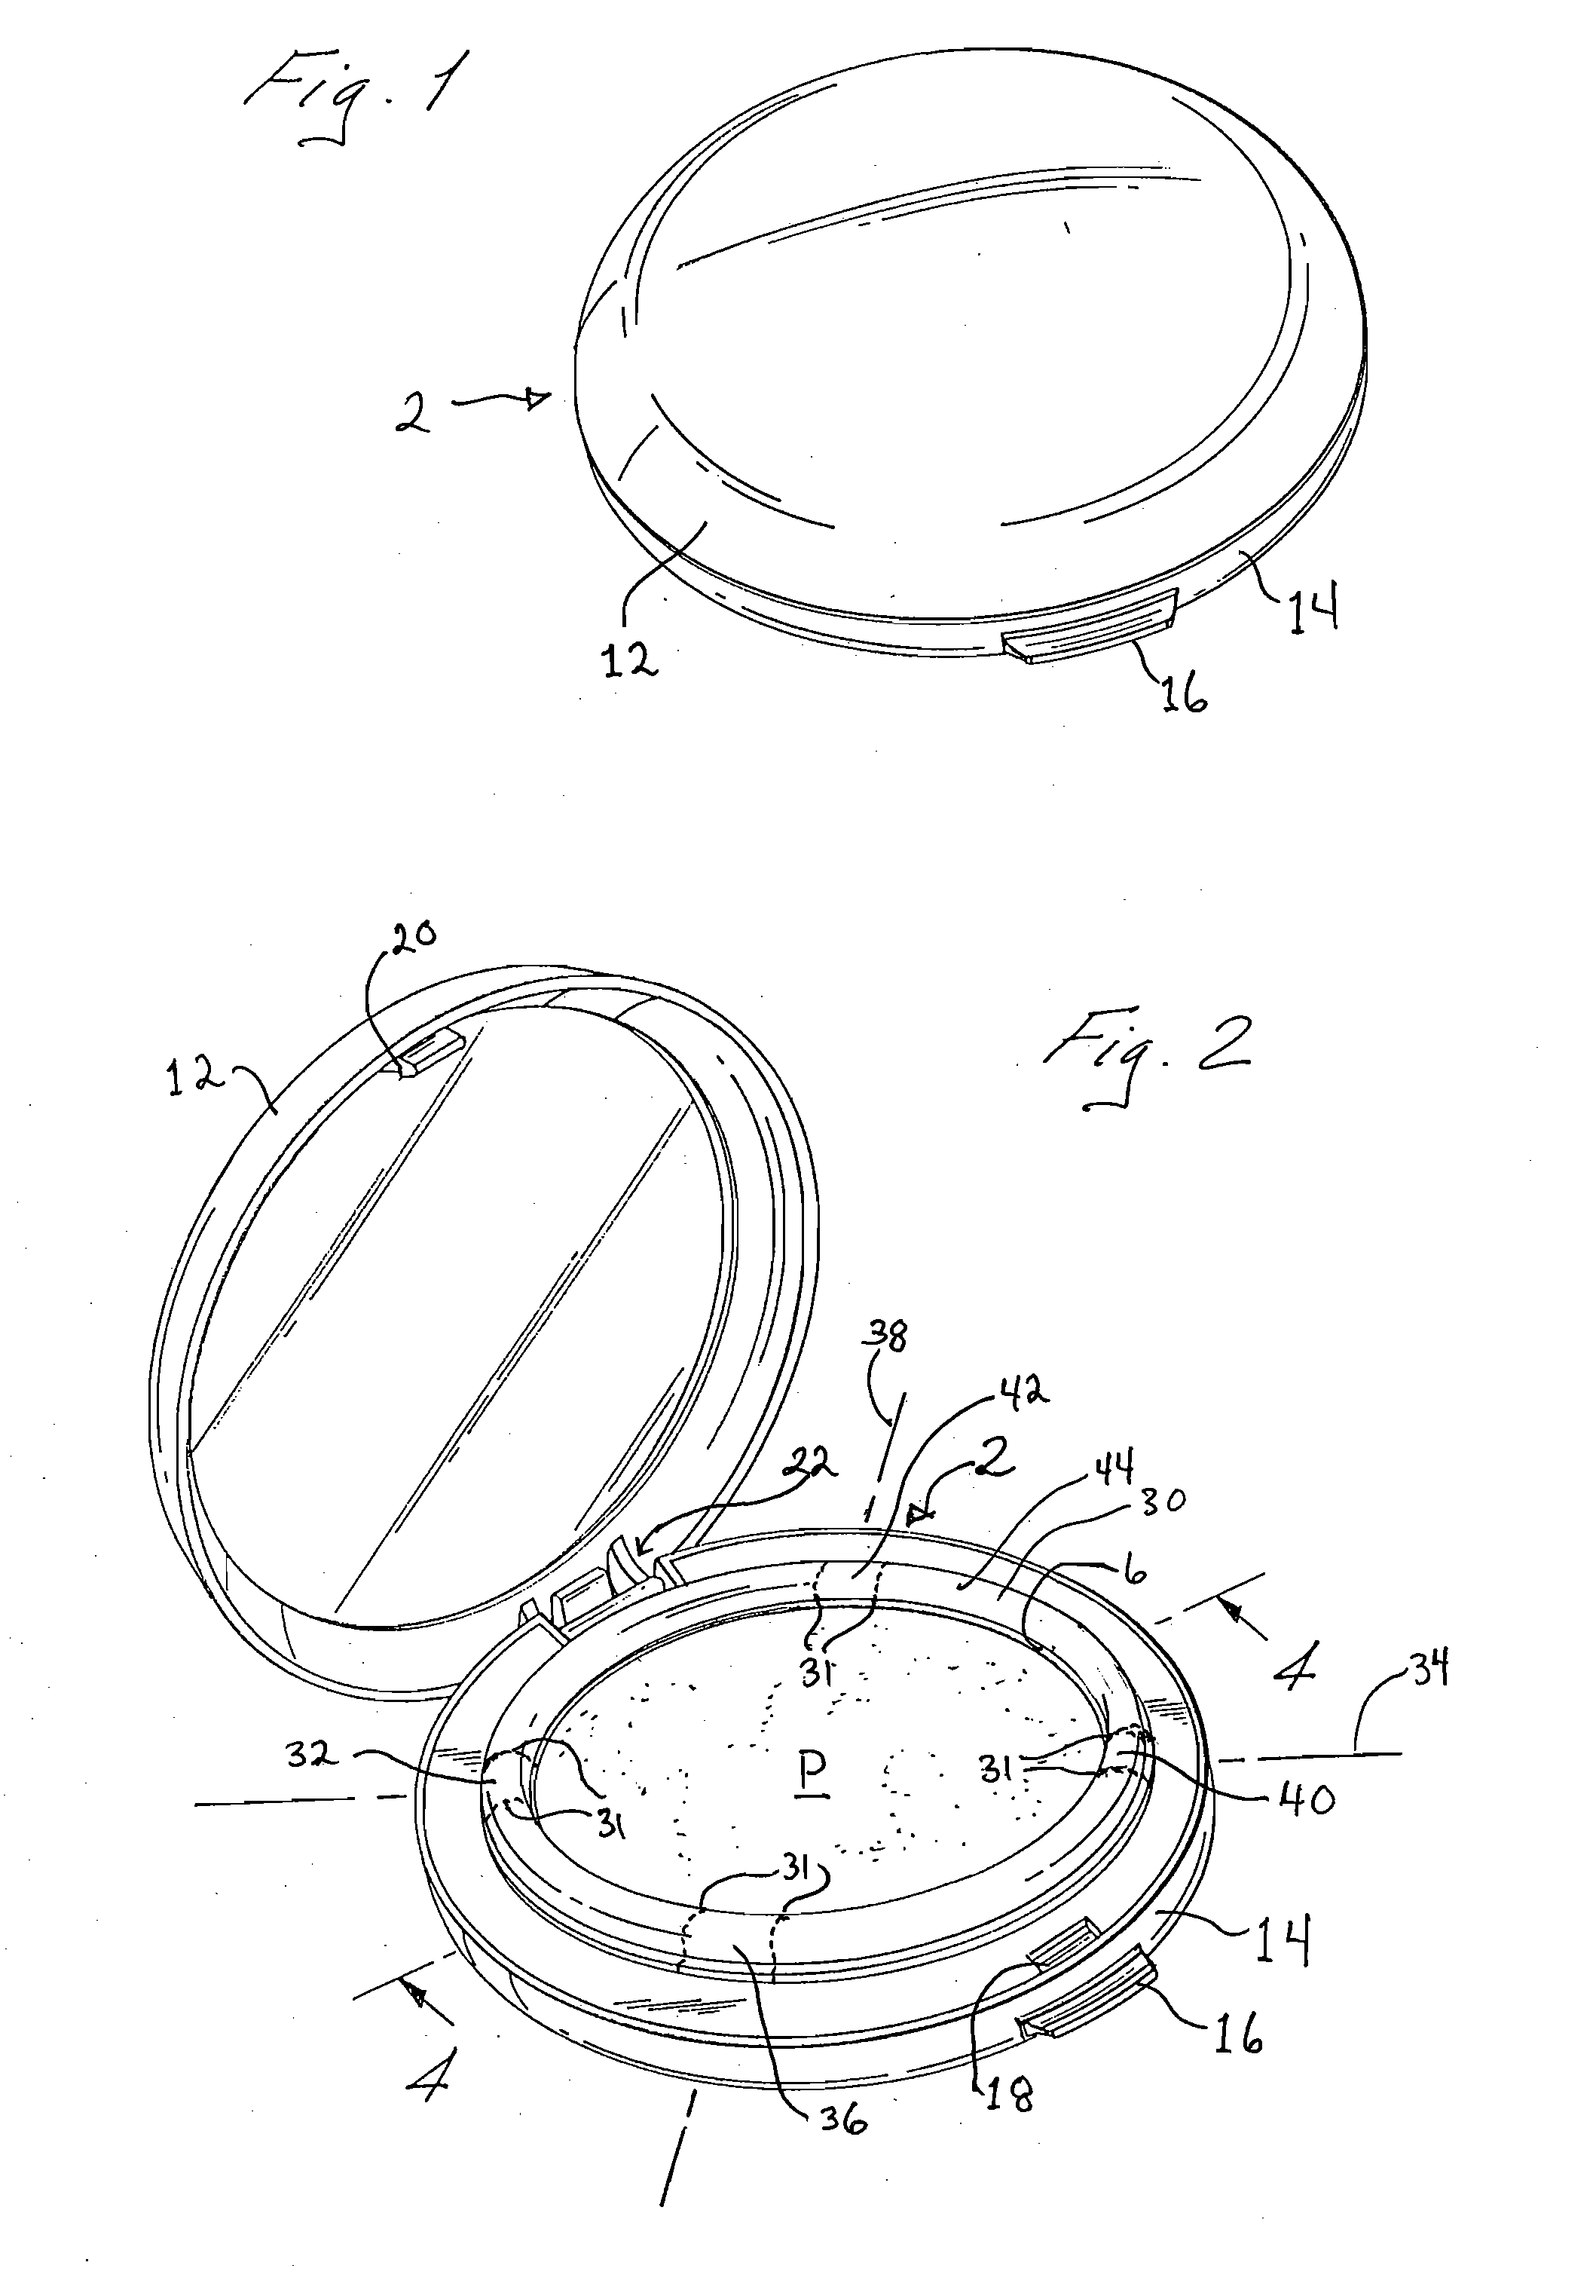 Shock absorber for cosmetic compact